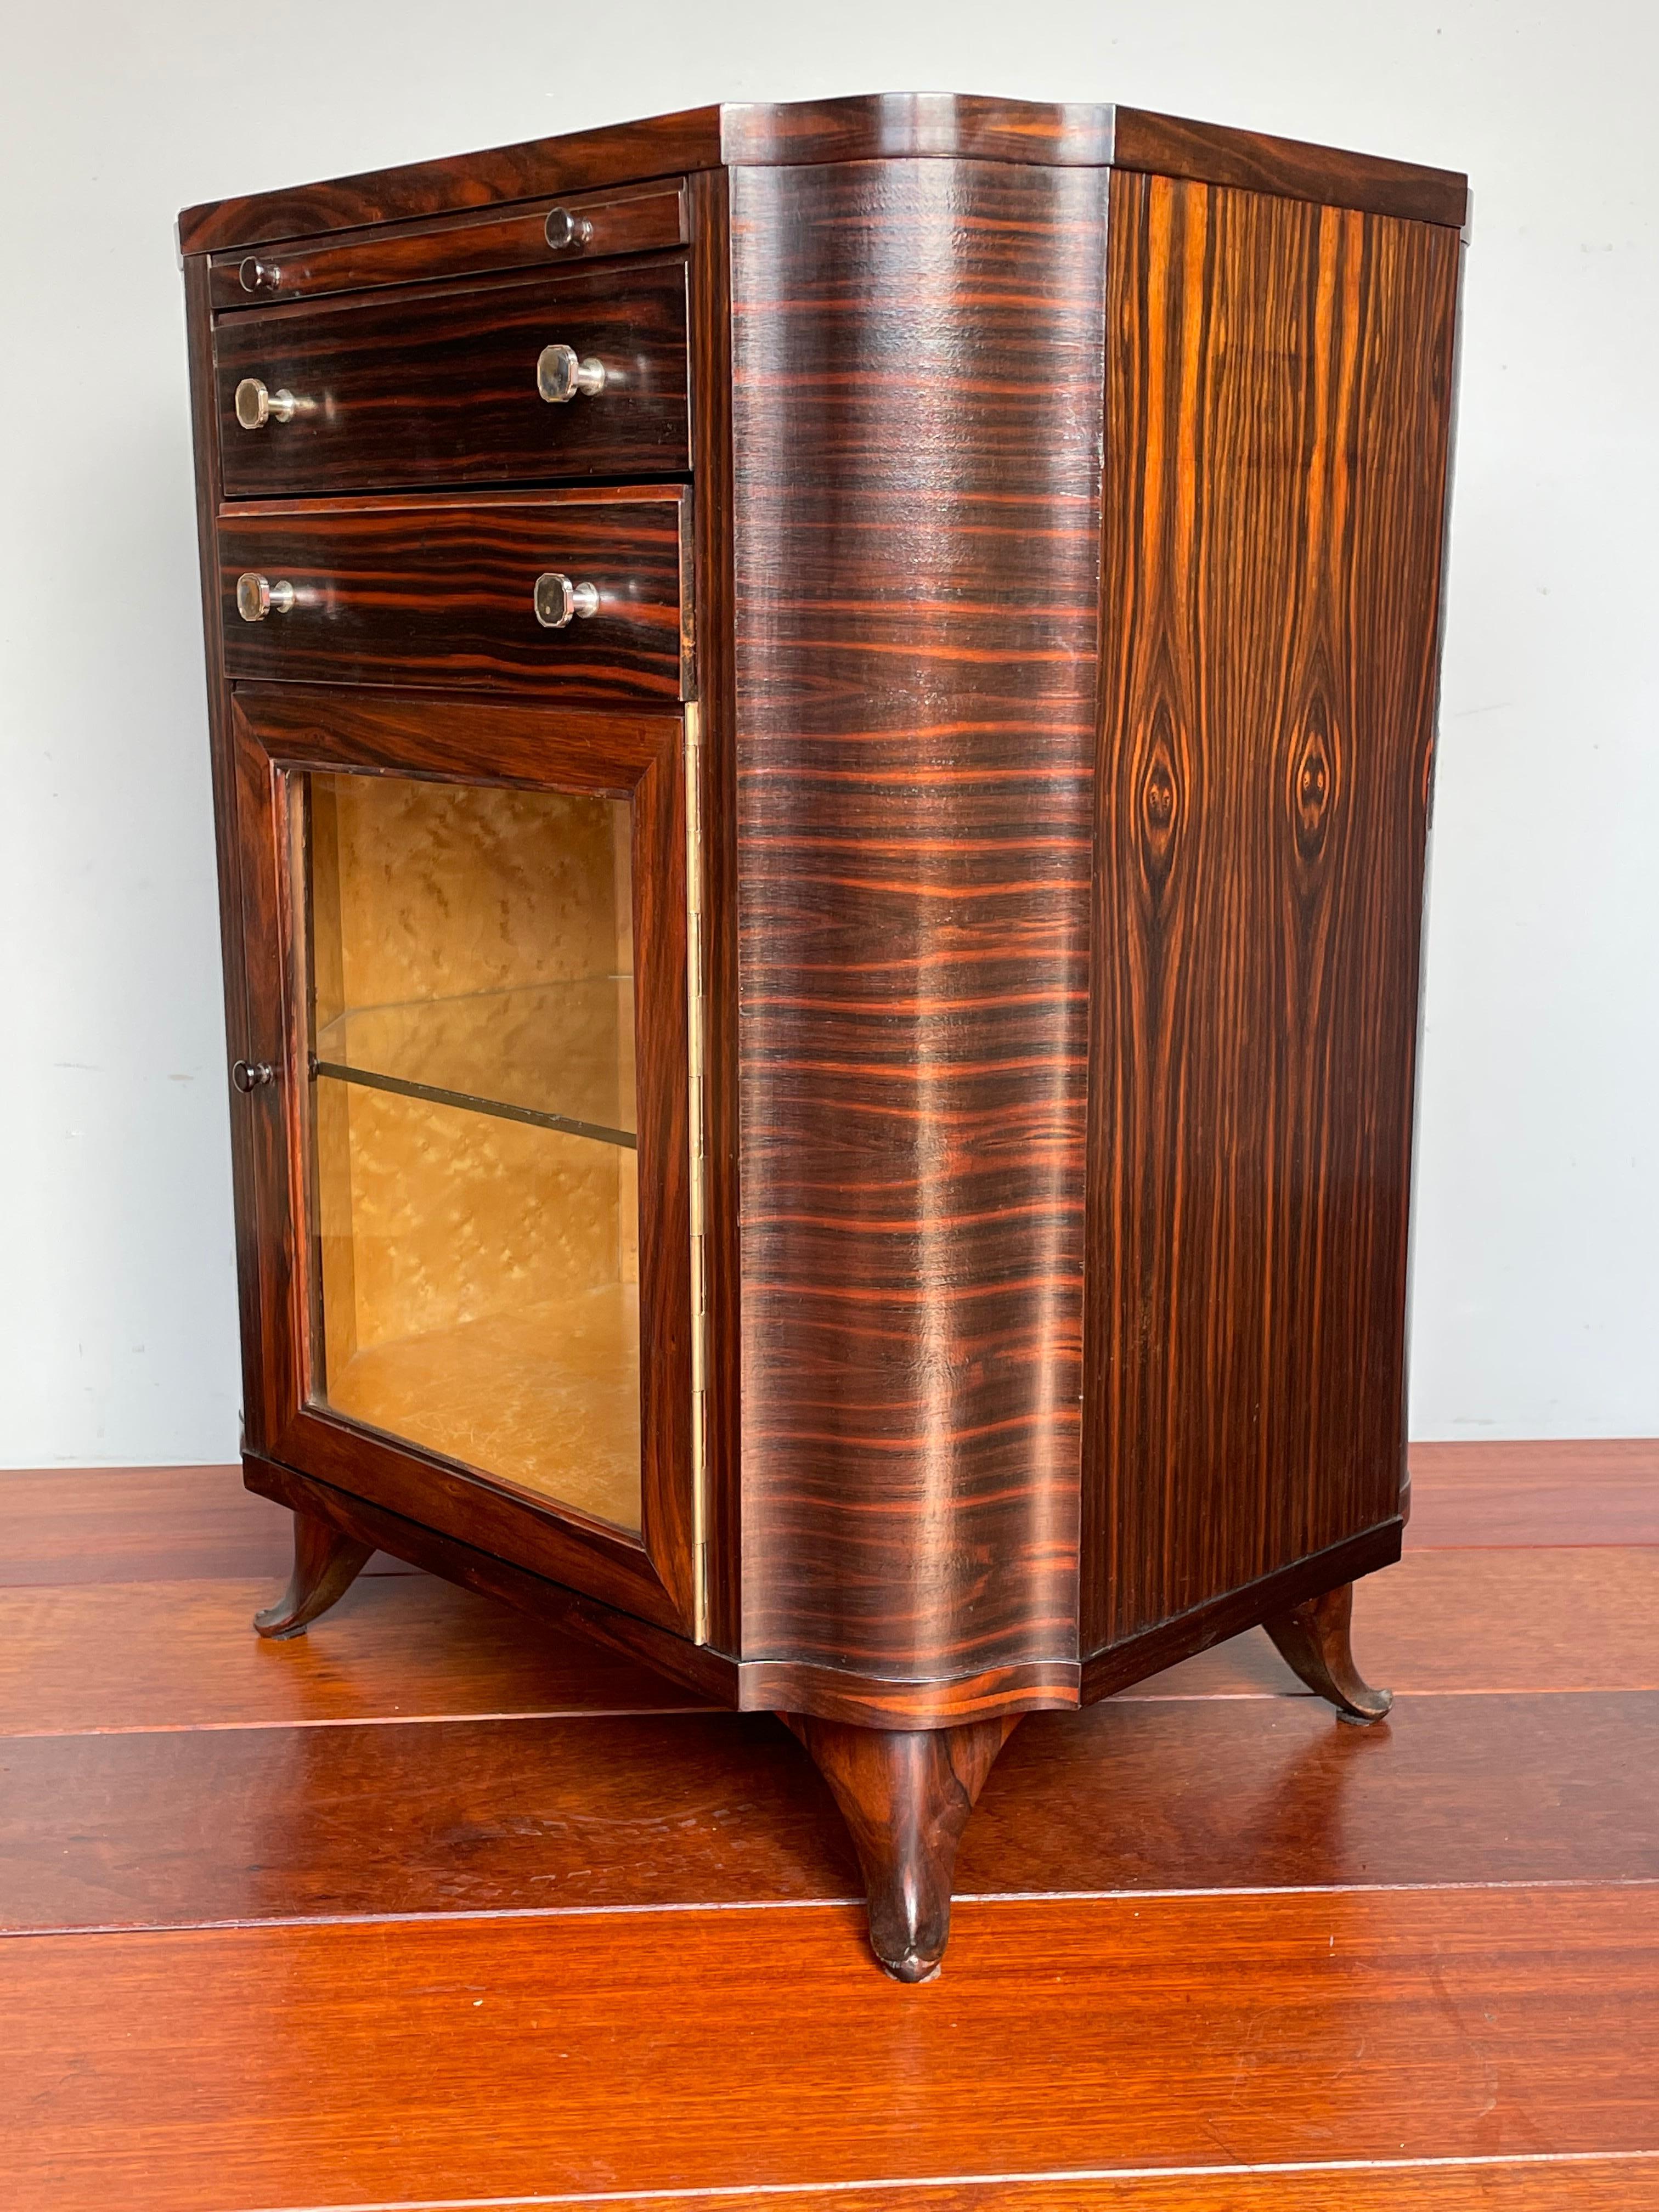 Stunning small size Art Deco cabinet with silvered bronze handles on the drawers.

When it comes to antiques, somehow we have always known what to buy when it comes to quality, beauty and practicality. We don't know why, but those right pieces also